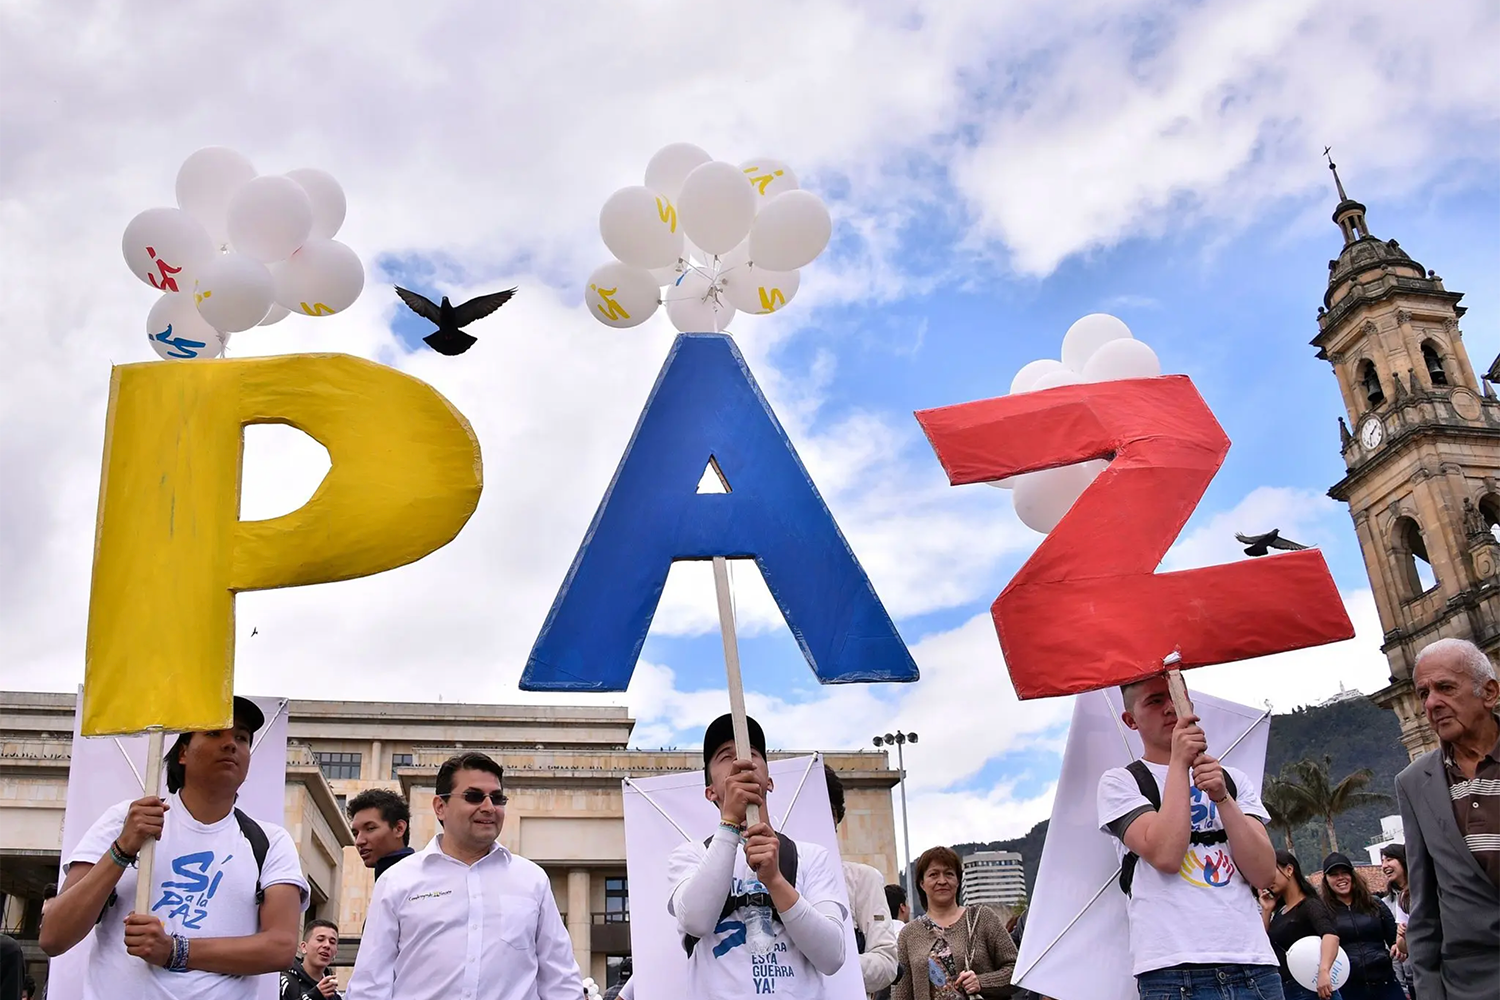 A group of protesters celebrate the peace agreement in Colombia in the Plaza Bolívar in Bogotá, on September 26, 2016. Credit Guillermo Legaria/ Getty Images